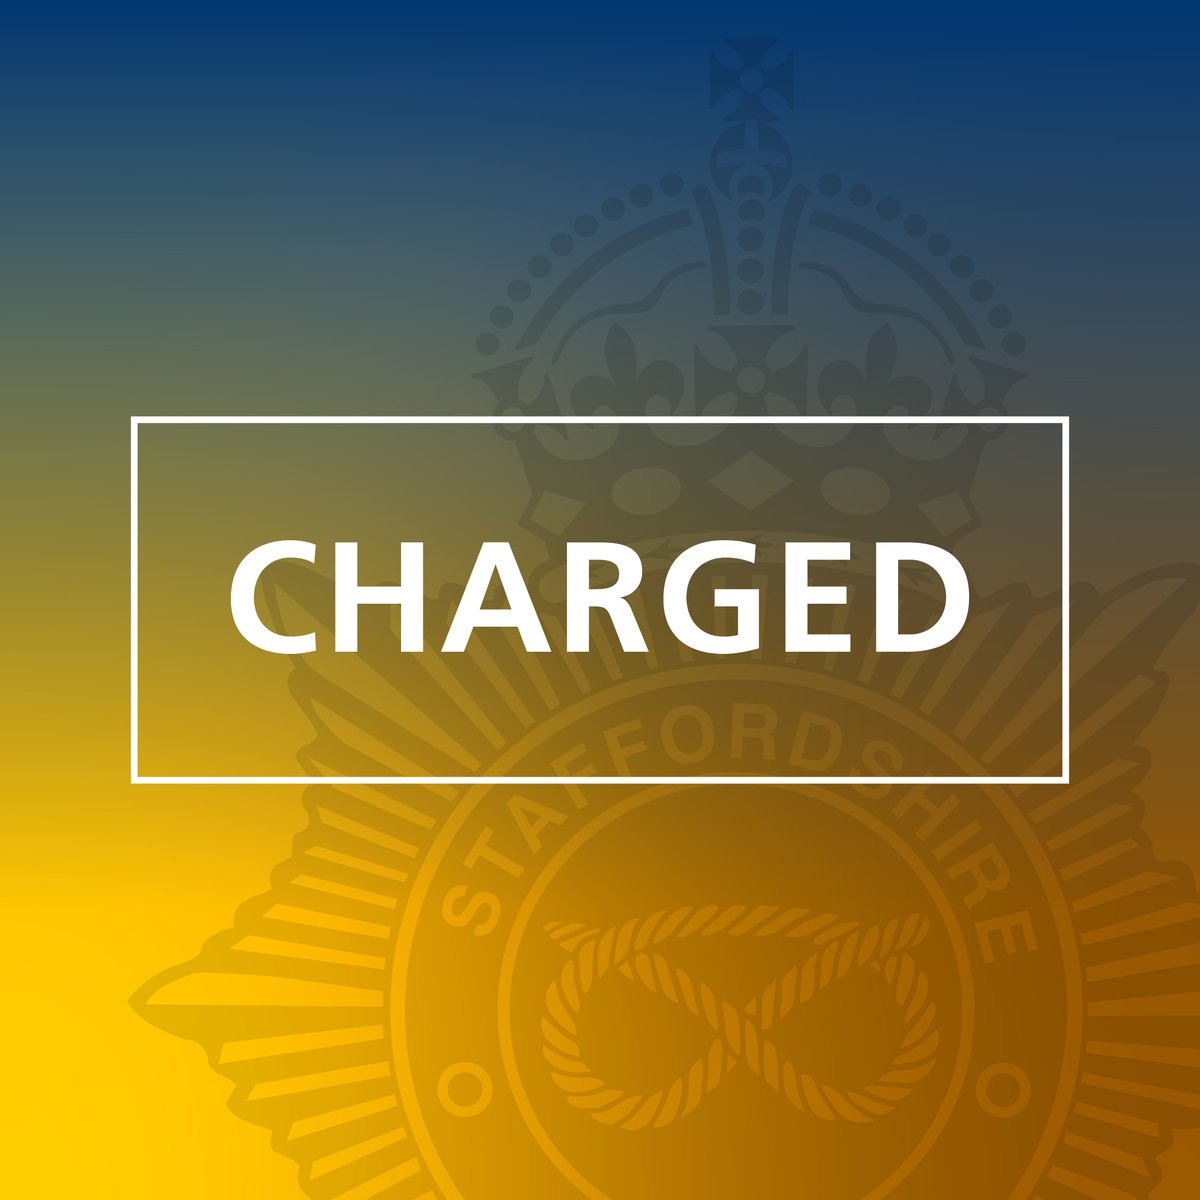 A man has been charged with ten child sexual offences in Burton-on-Trent. Read more here: orlo.uk/iyyyC